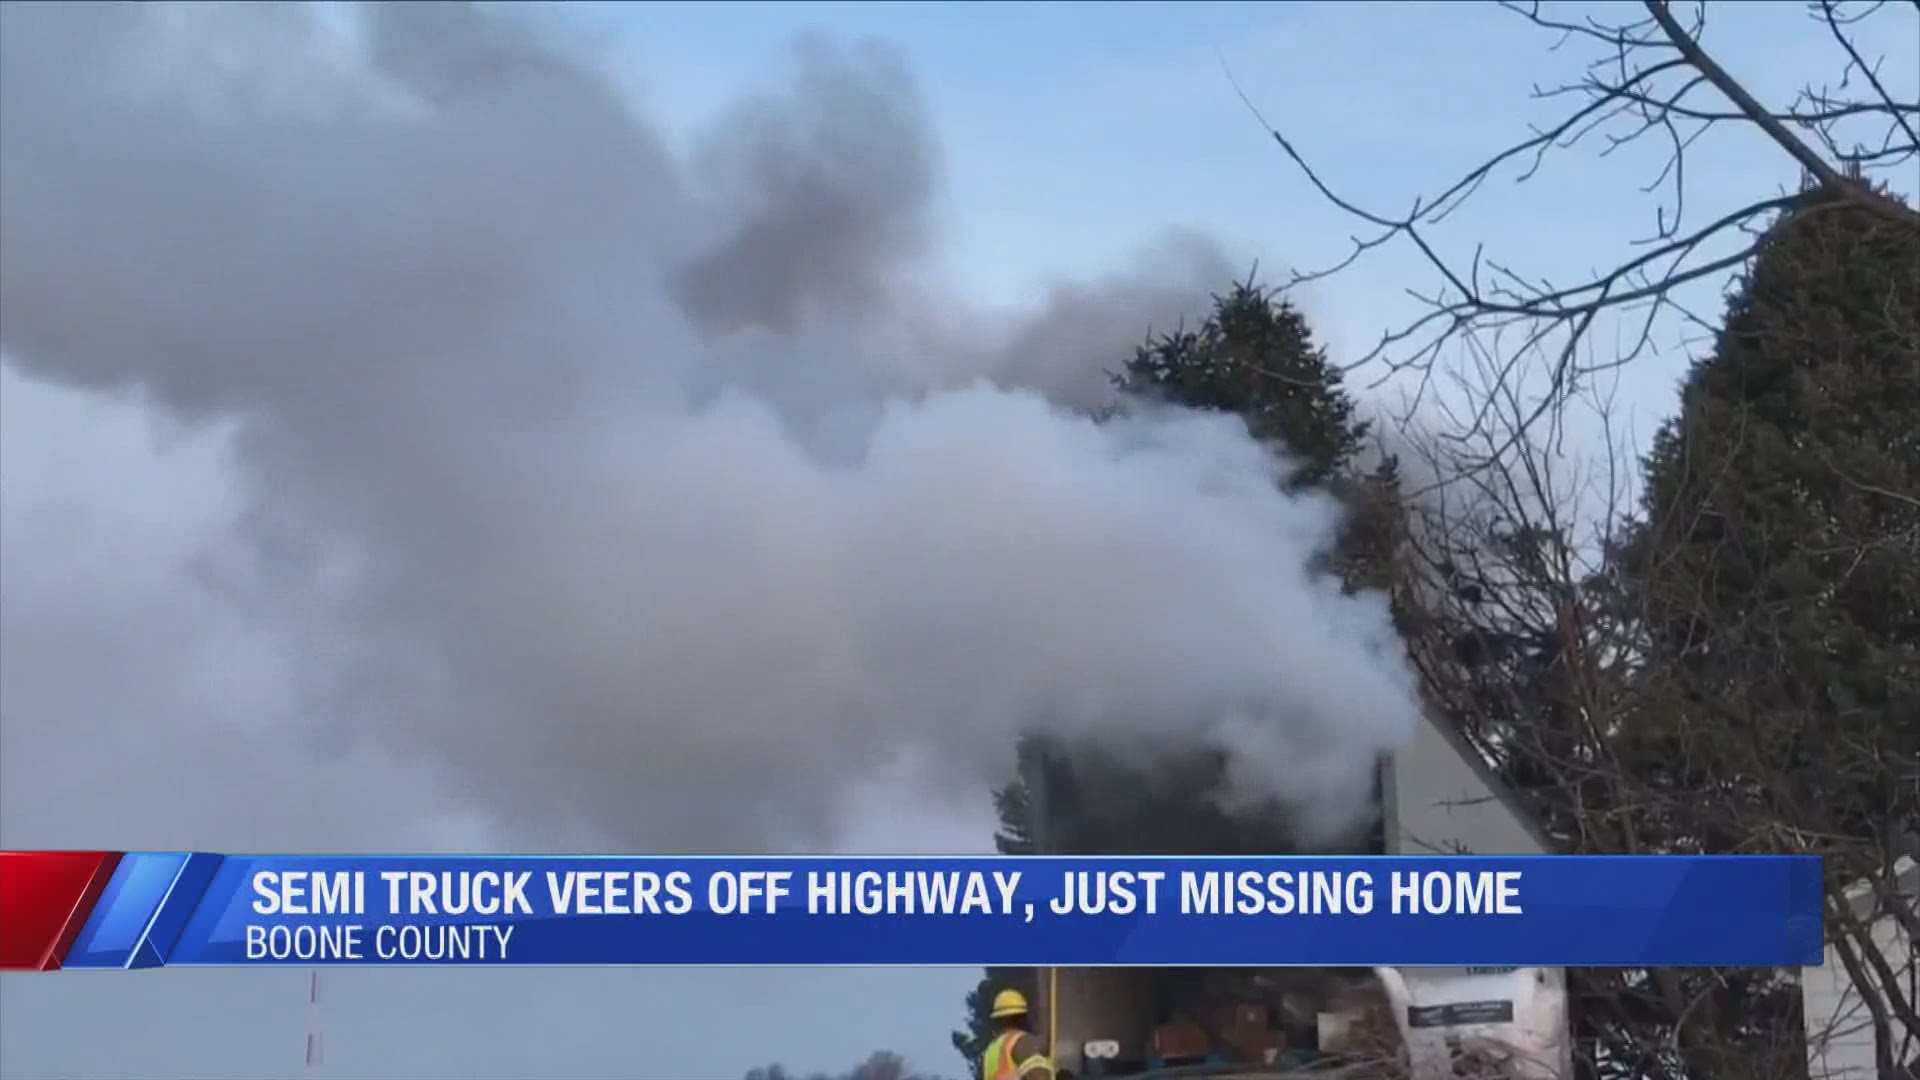 Local 5 was on scene of a semi truck that drove off the highway onto someone's property, starting on fire.